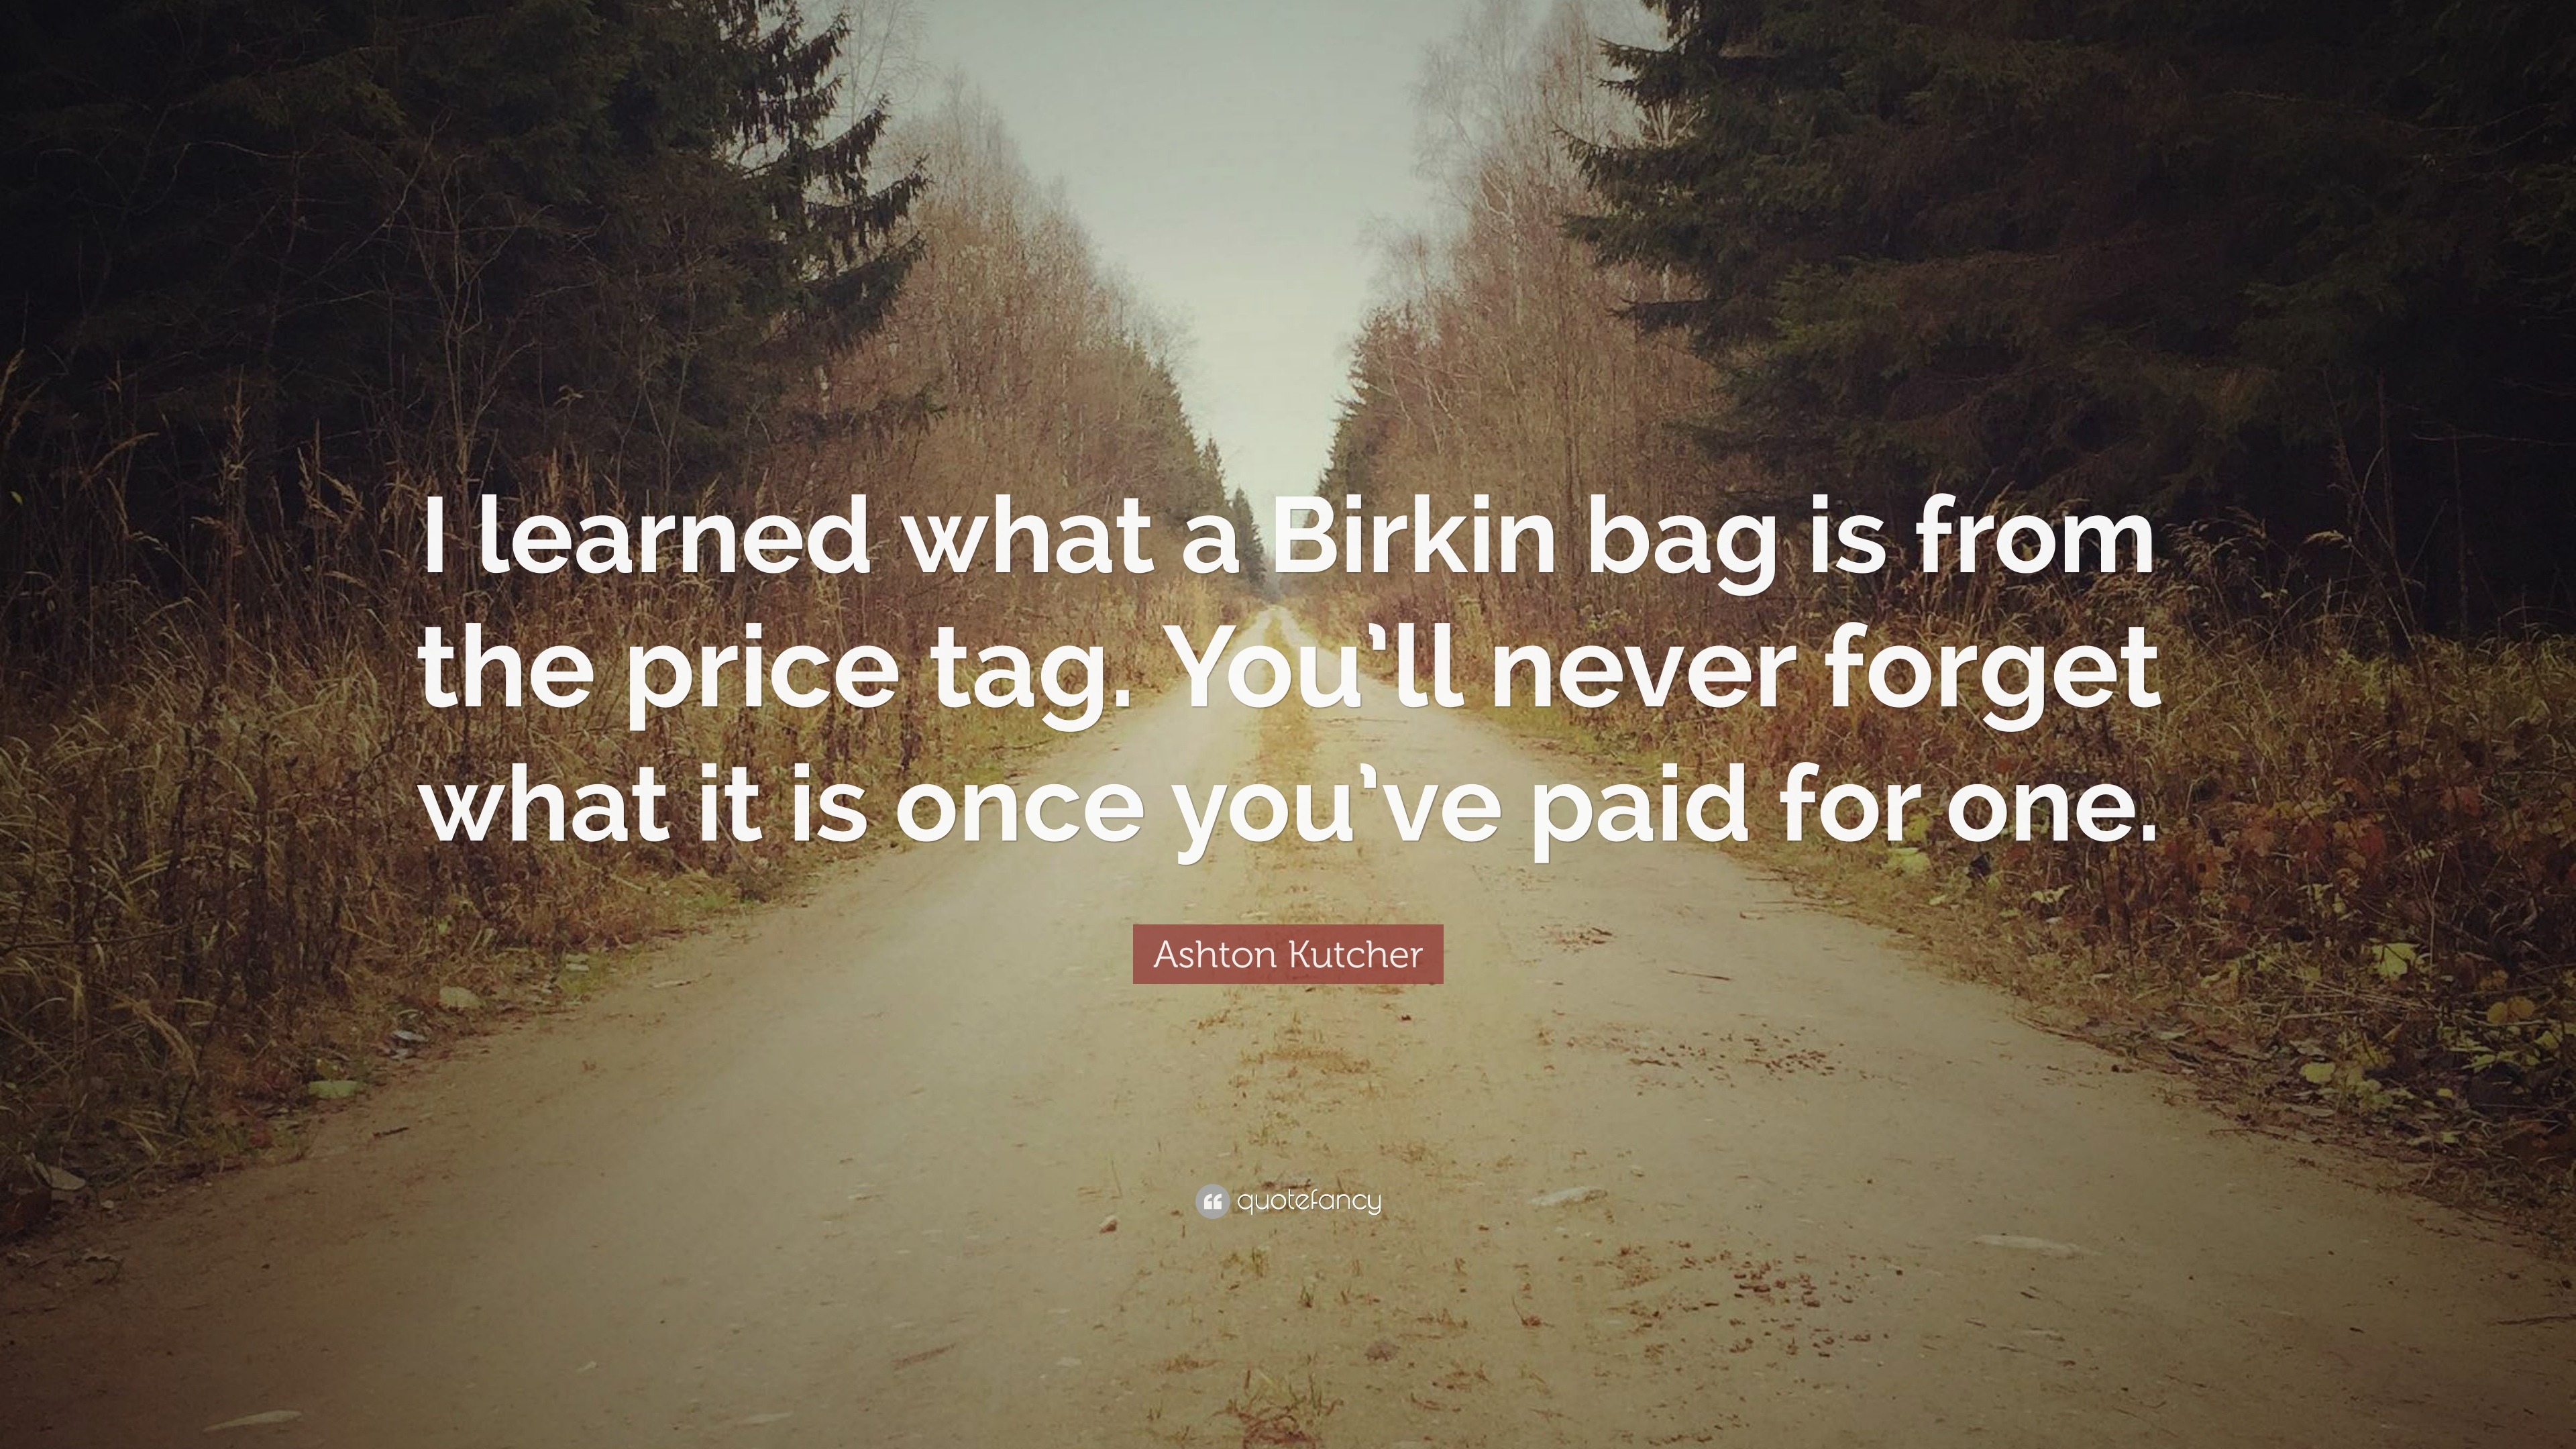 Ashton Kutcher Quote: “I learned what a Birkin bag is from the price tag.  You'll